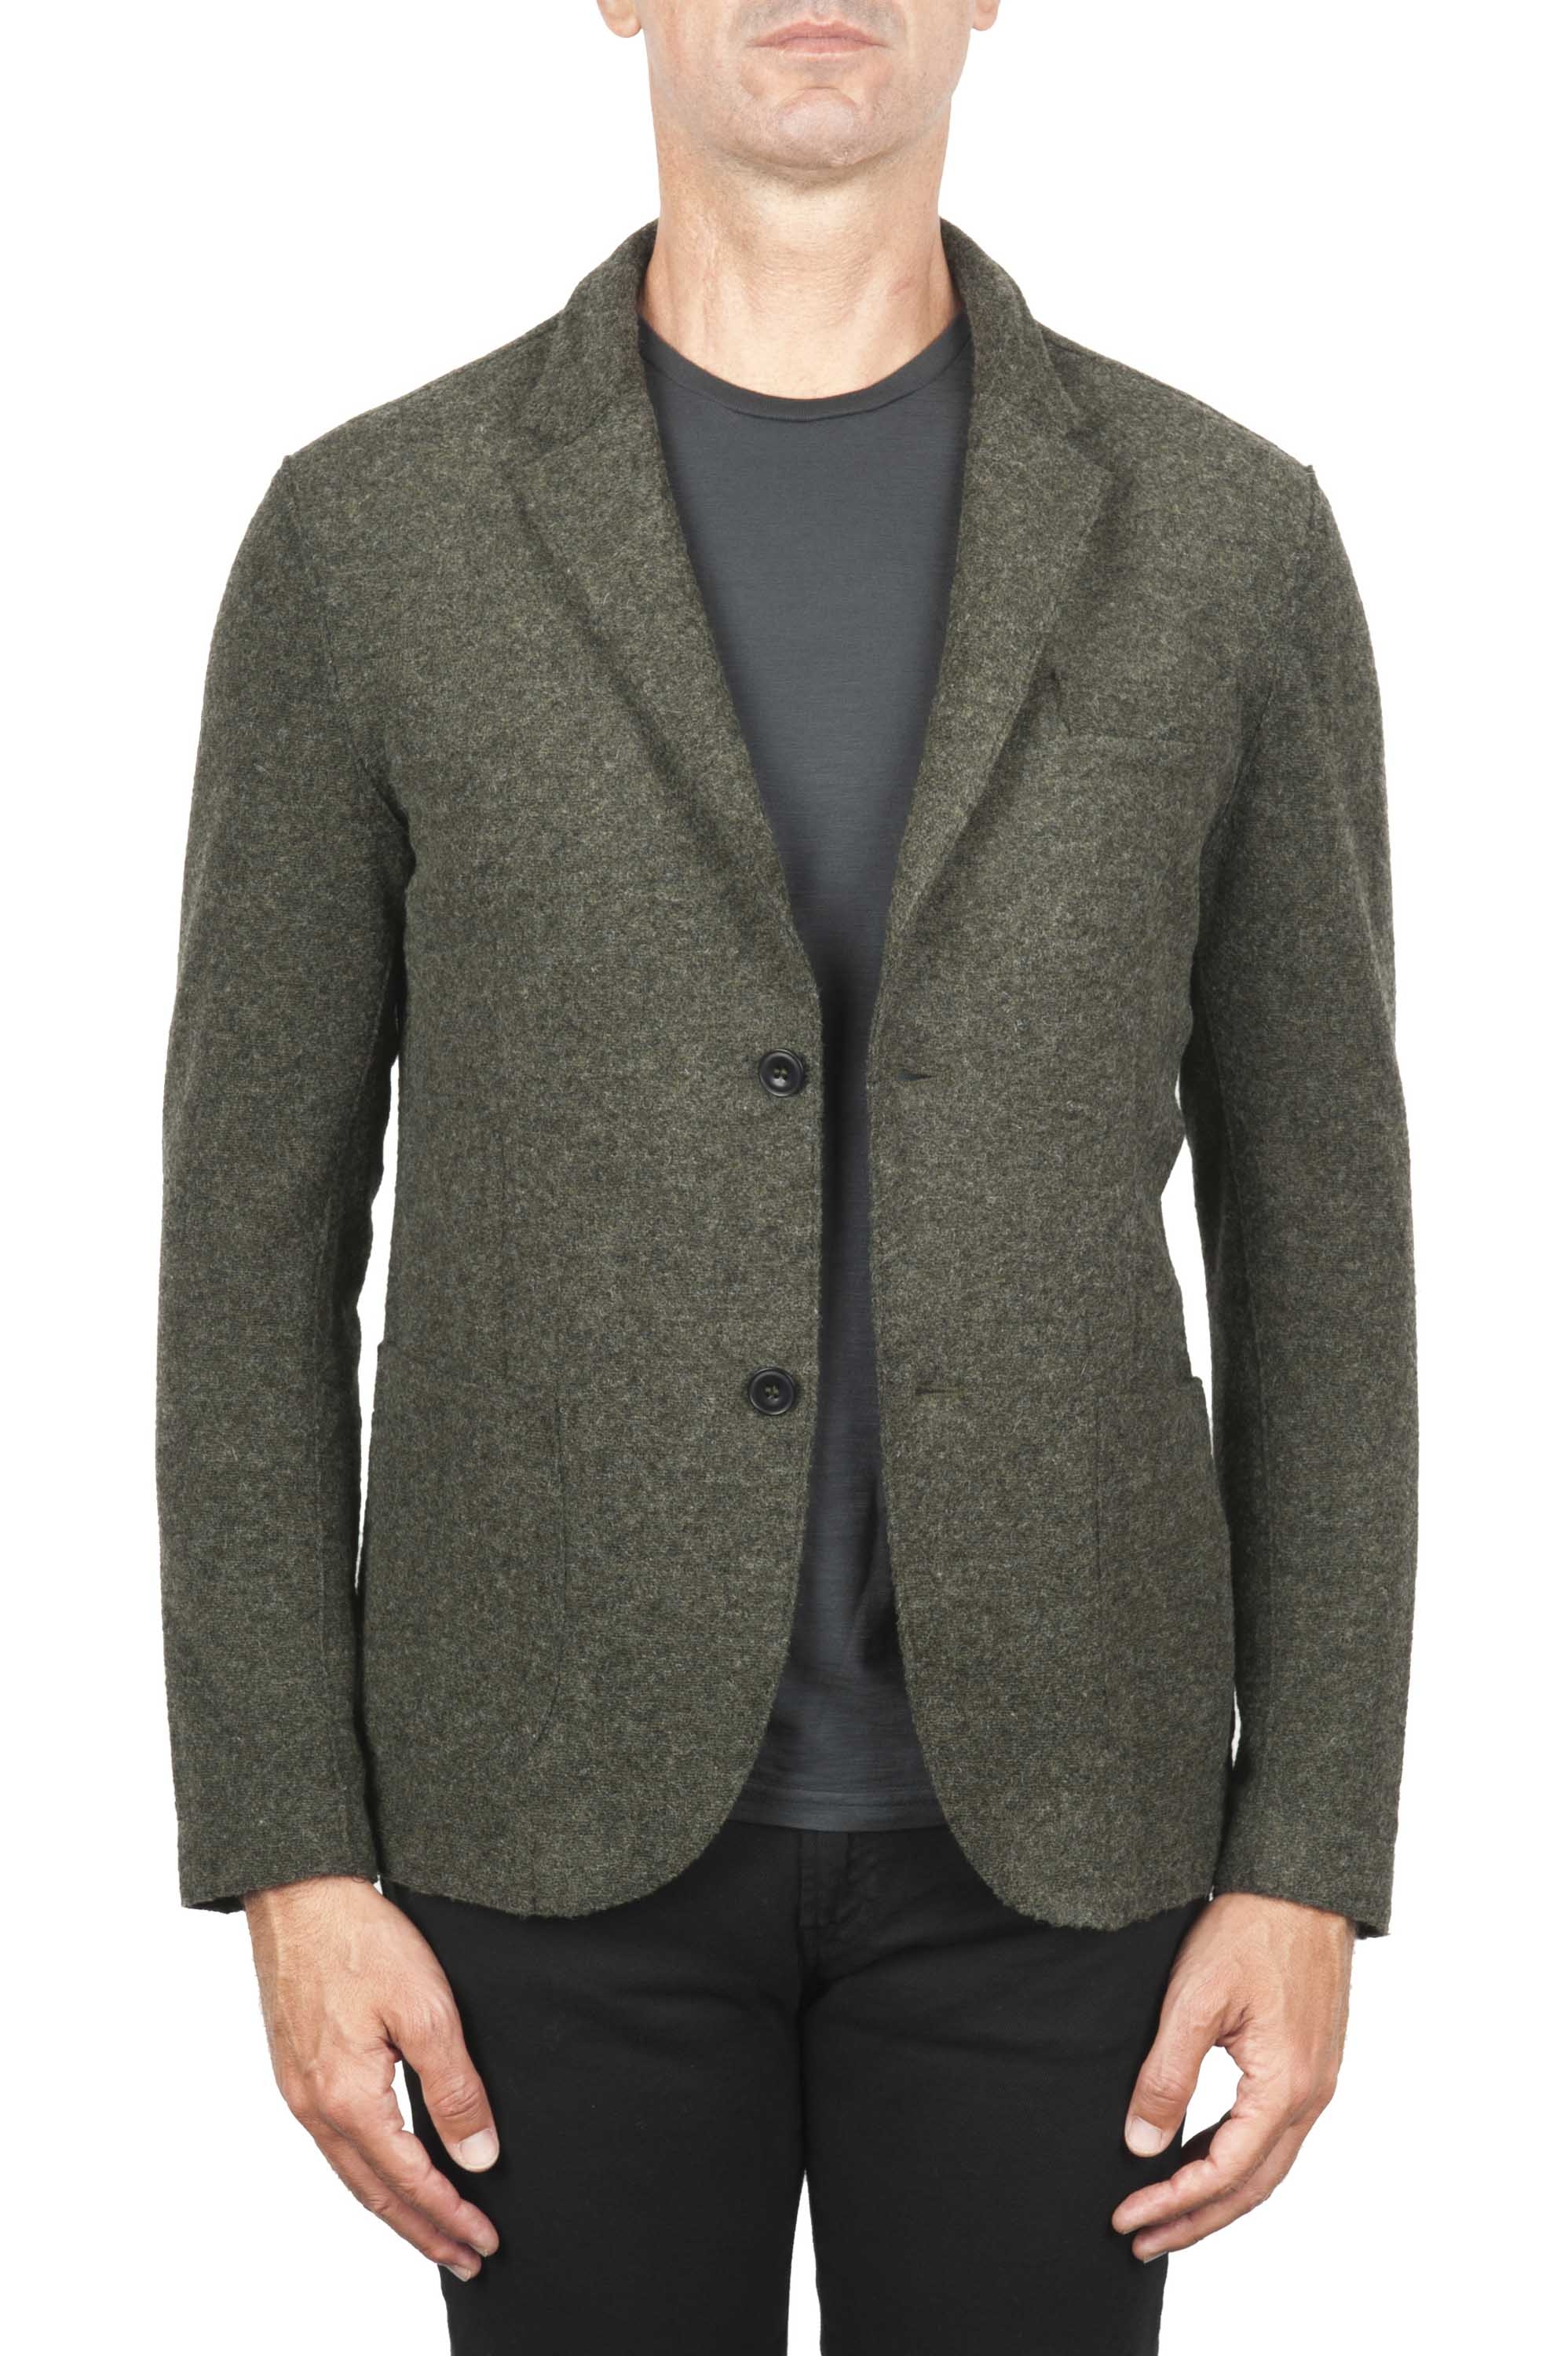 SBU 03105_2020AW Green wool blend sport jacket unconstructed and unlined 01